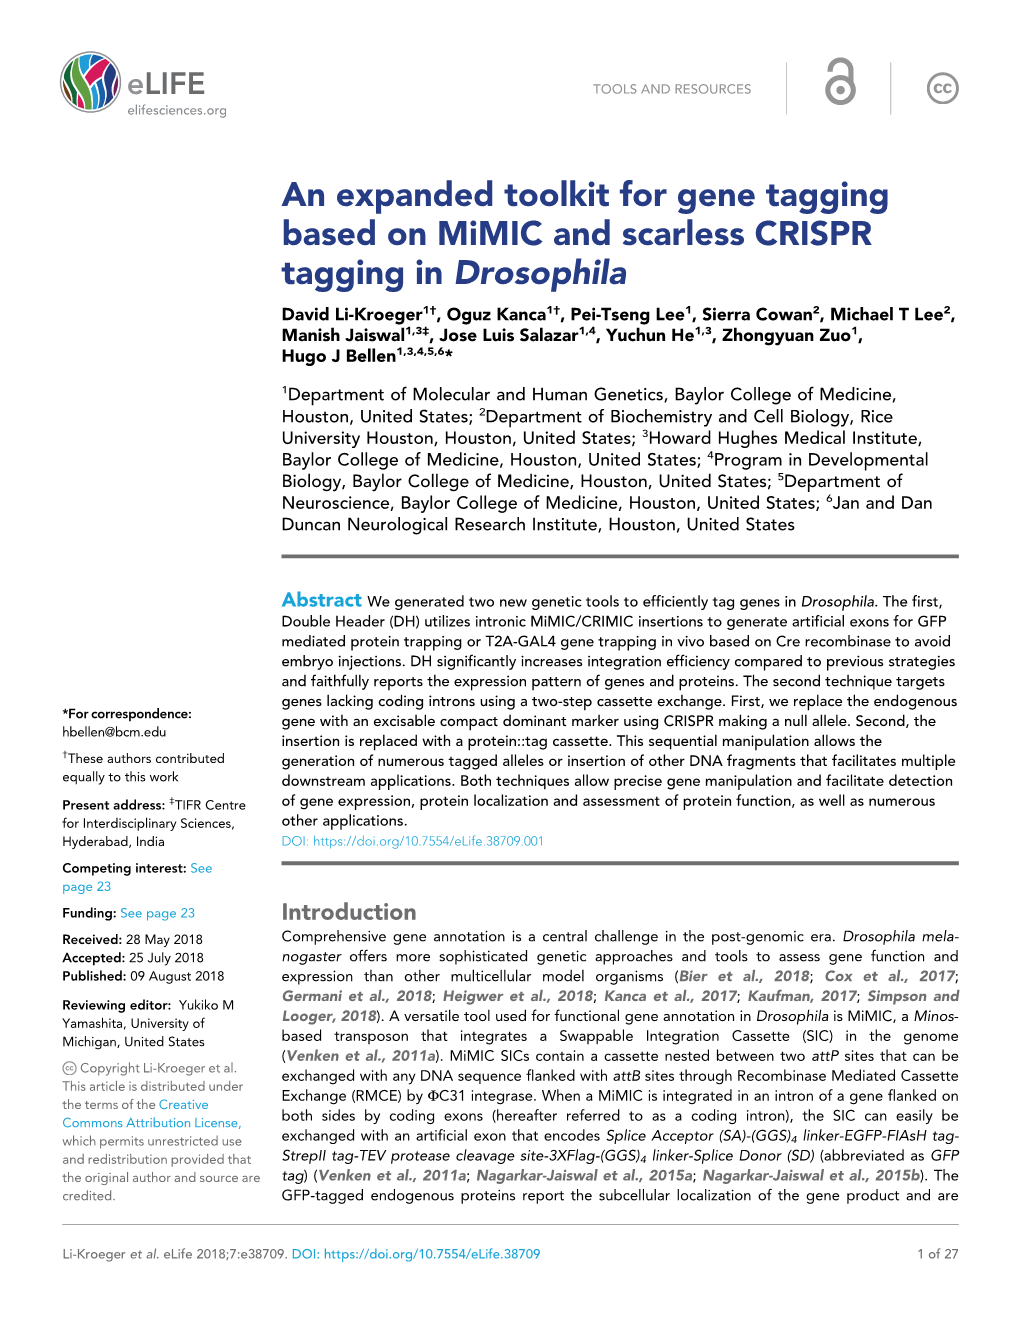 An Expanded Toolkit for Gene Tagging Based on Mimic and Scarless